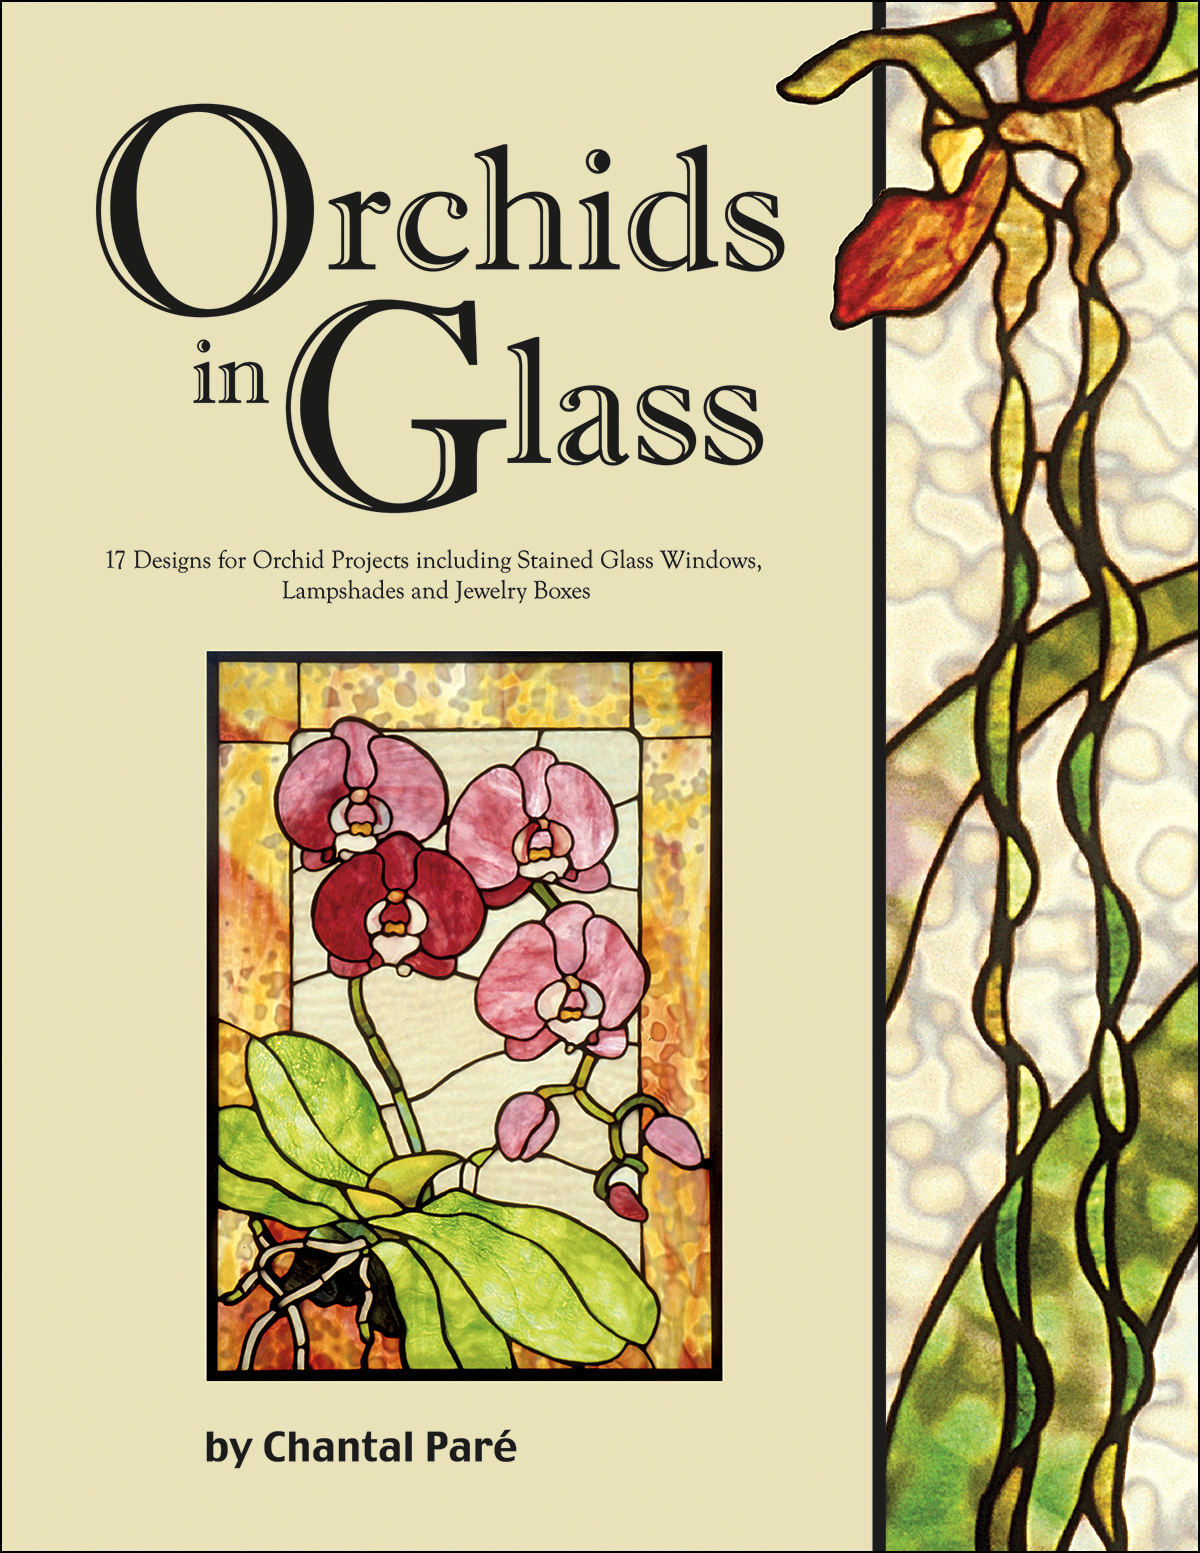 Orchids in glass â art glass love by wardell